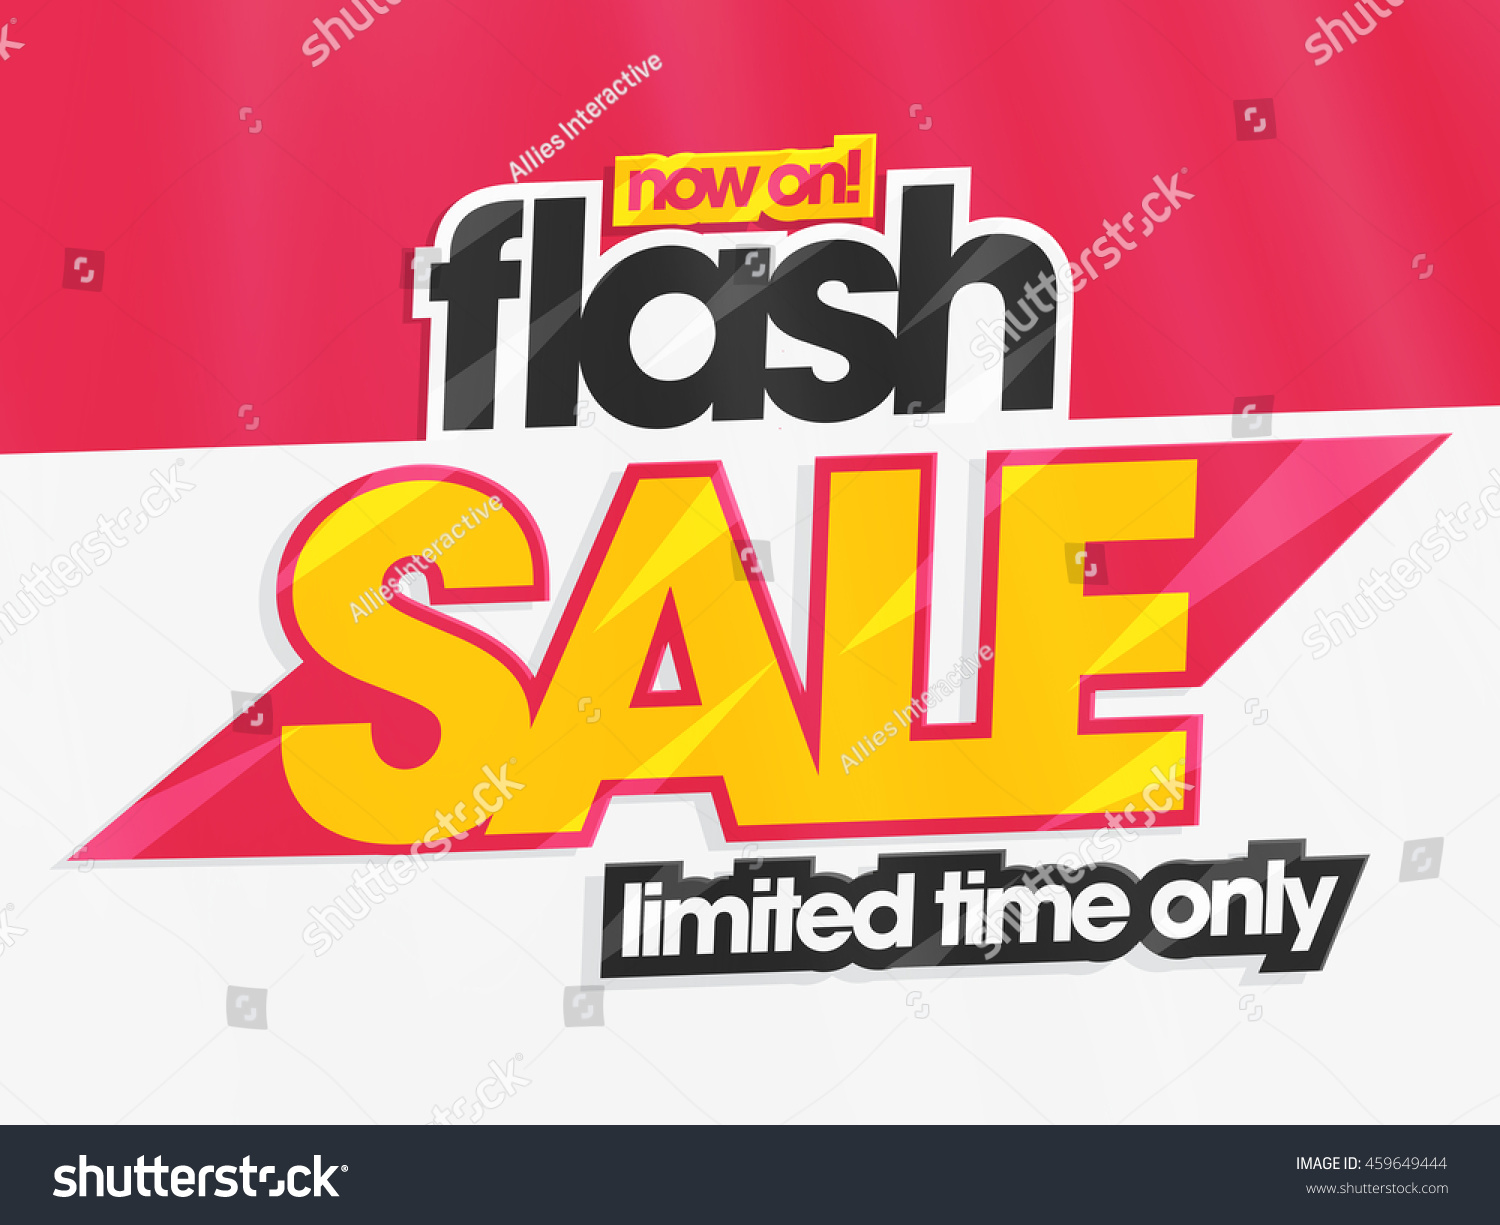 Flash Sale Limited Time Only Creative Stock Vector 459649444 Shutterstock